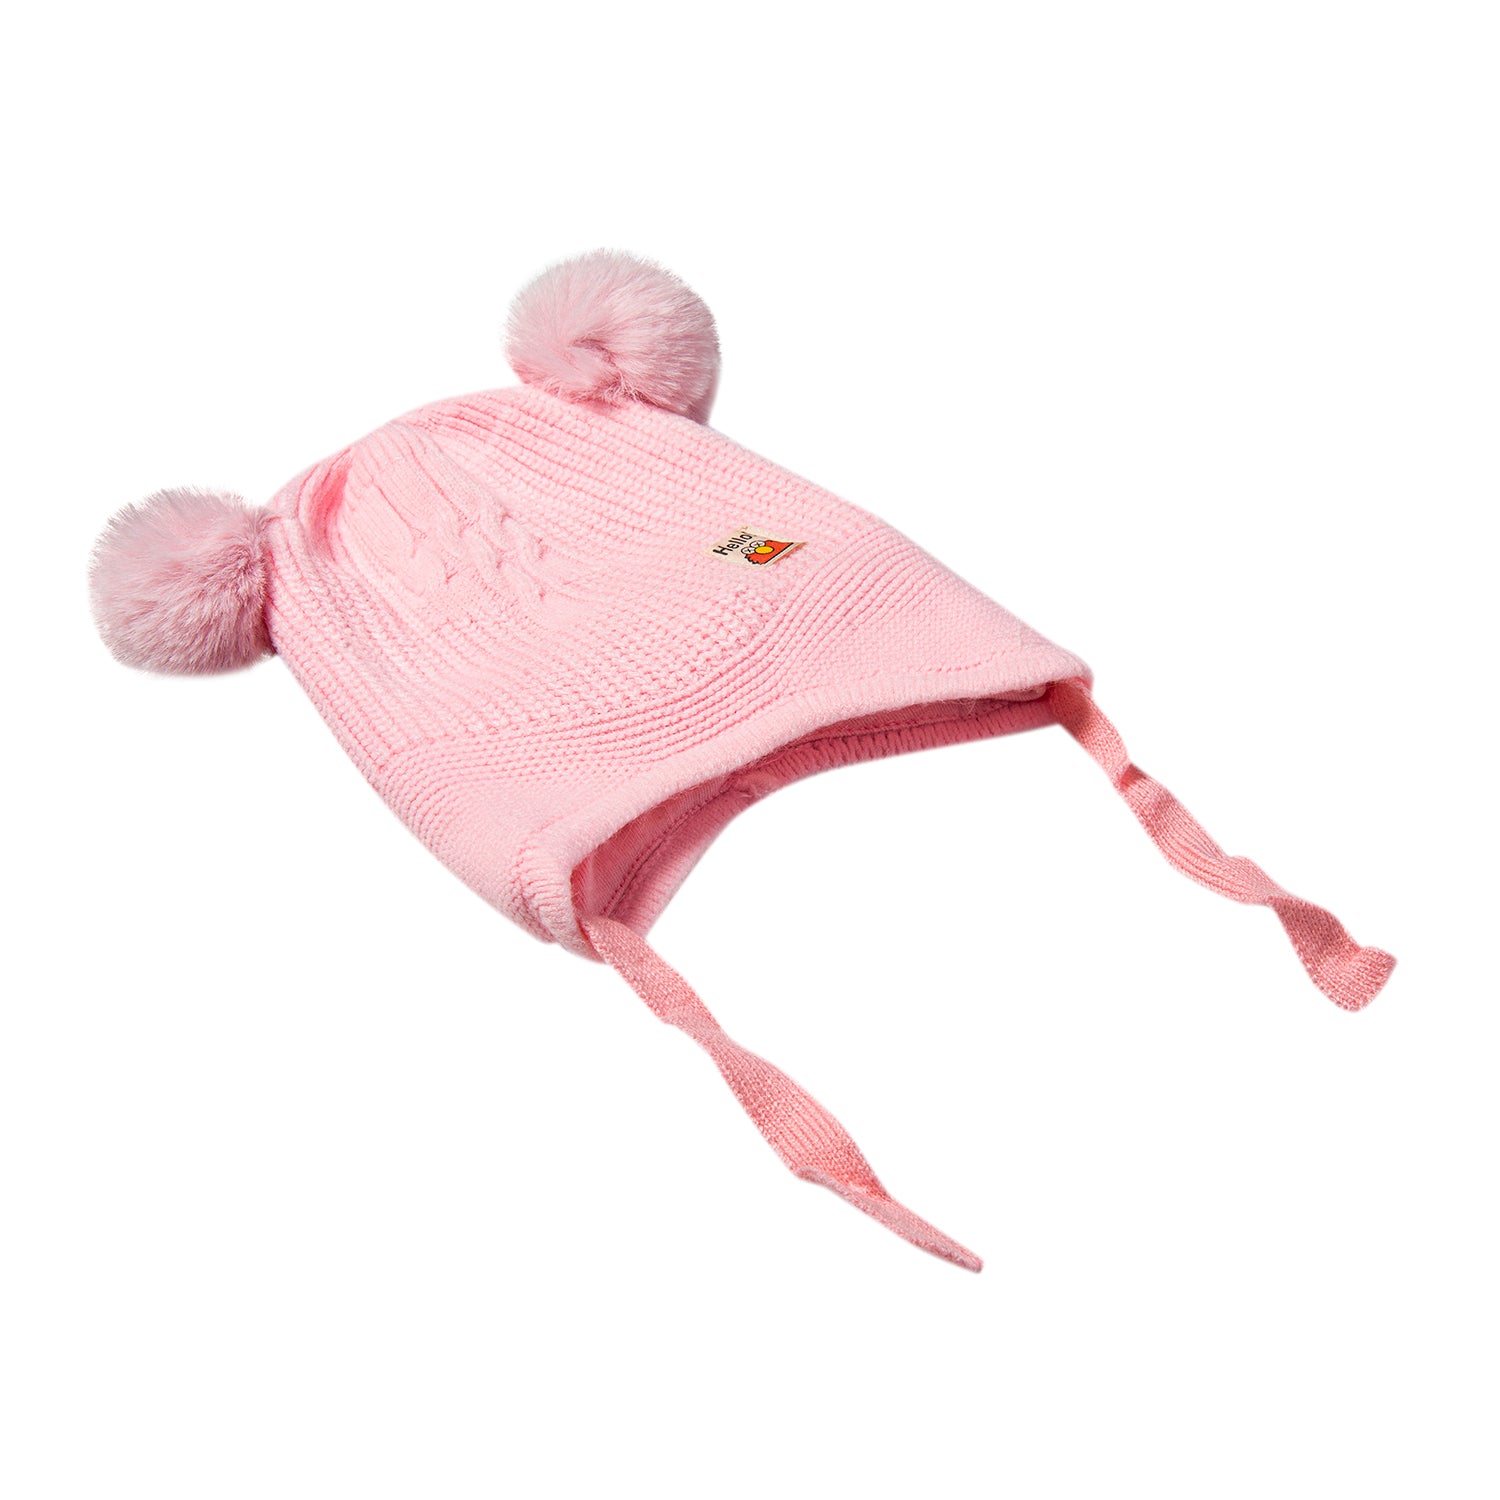 Knit Woollen Cap With Tie Knot For Ear Protection Solid Light Pink - Baby Moo